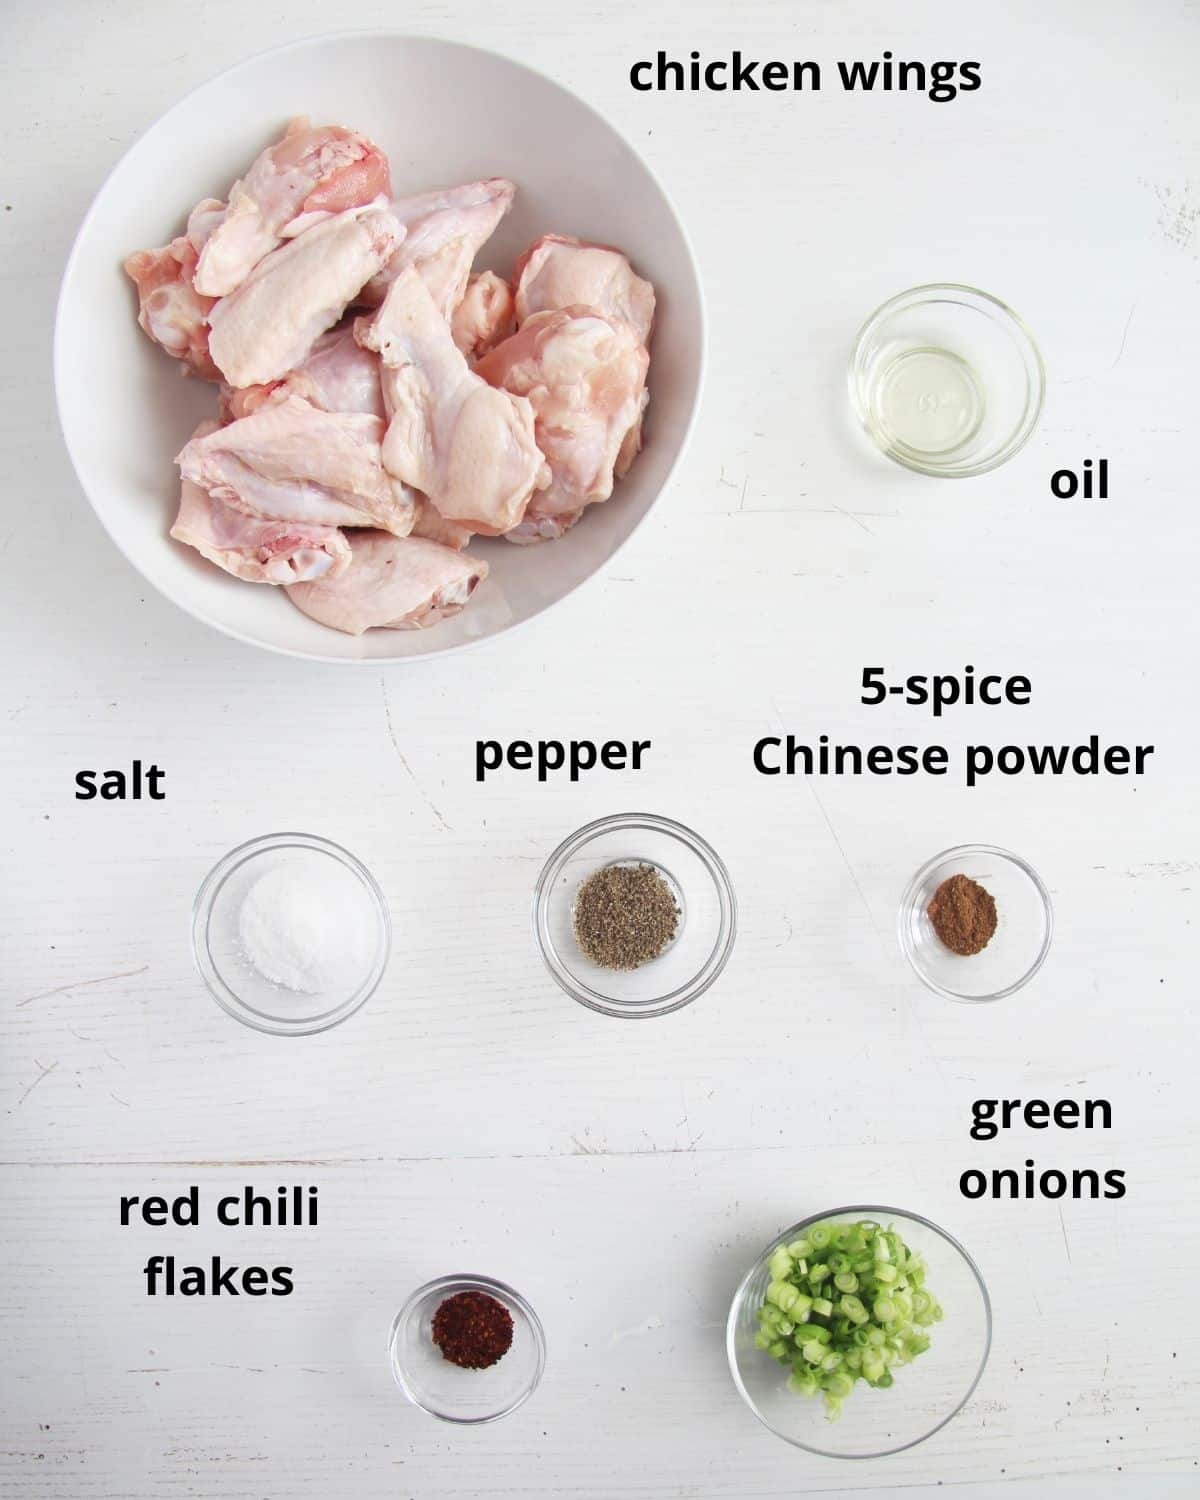 listed ingredients for making salt and pepper wings on the table.